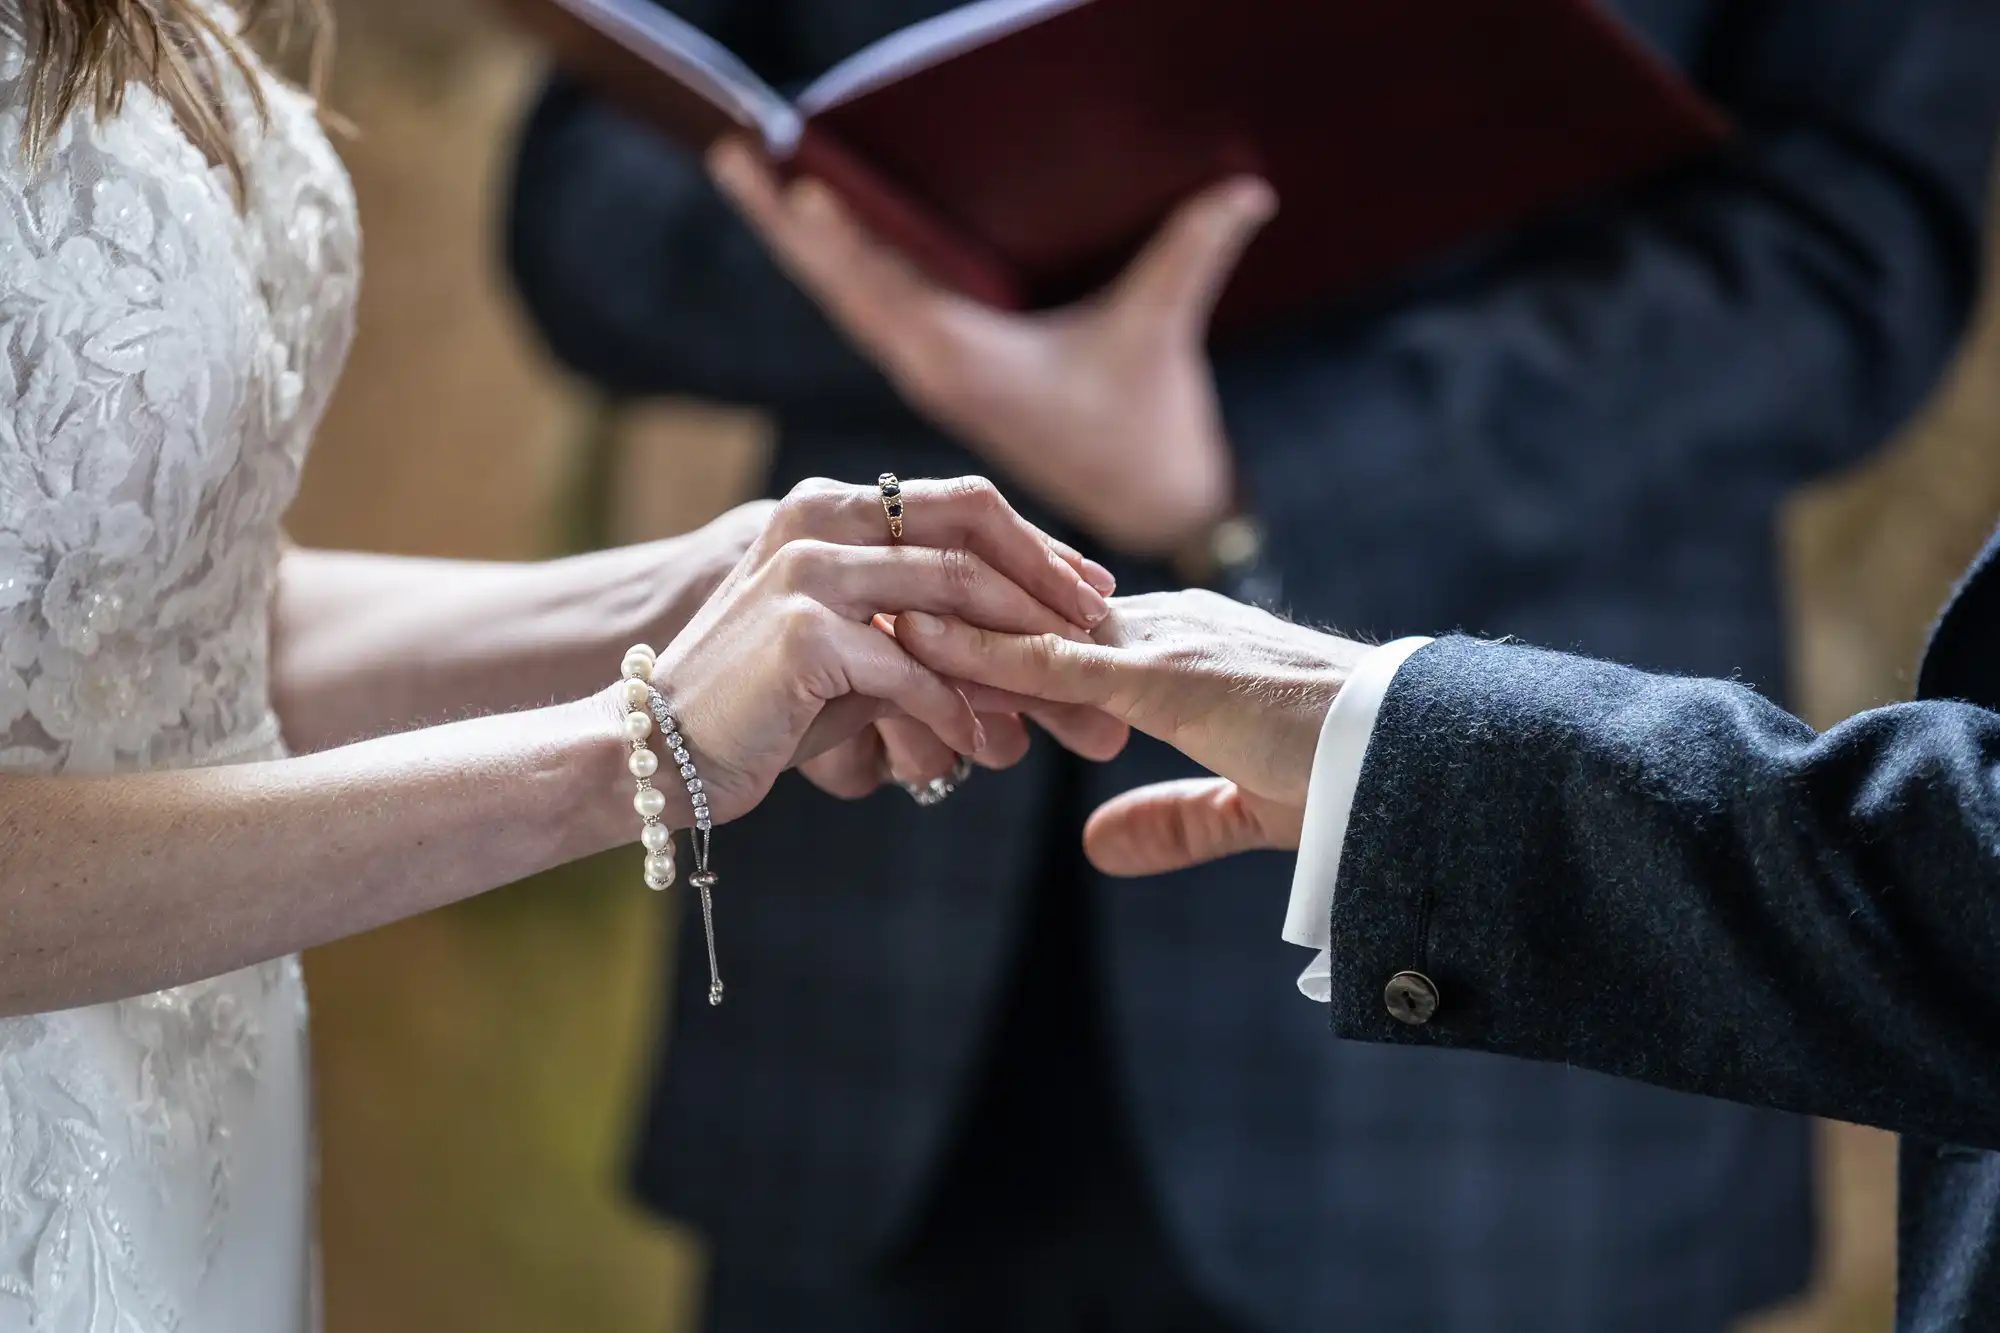 Close-up of a couple exchanging rings during a wedding ceremony, with an officiant holding an open book in the background. Both are dressed in formal attire.